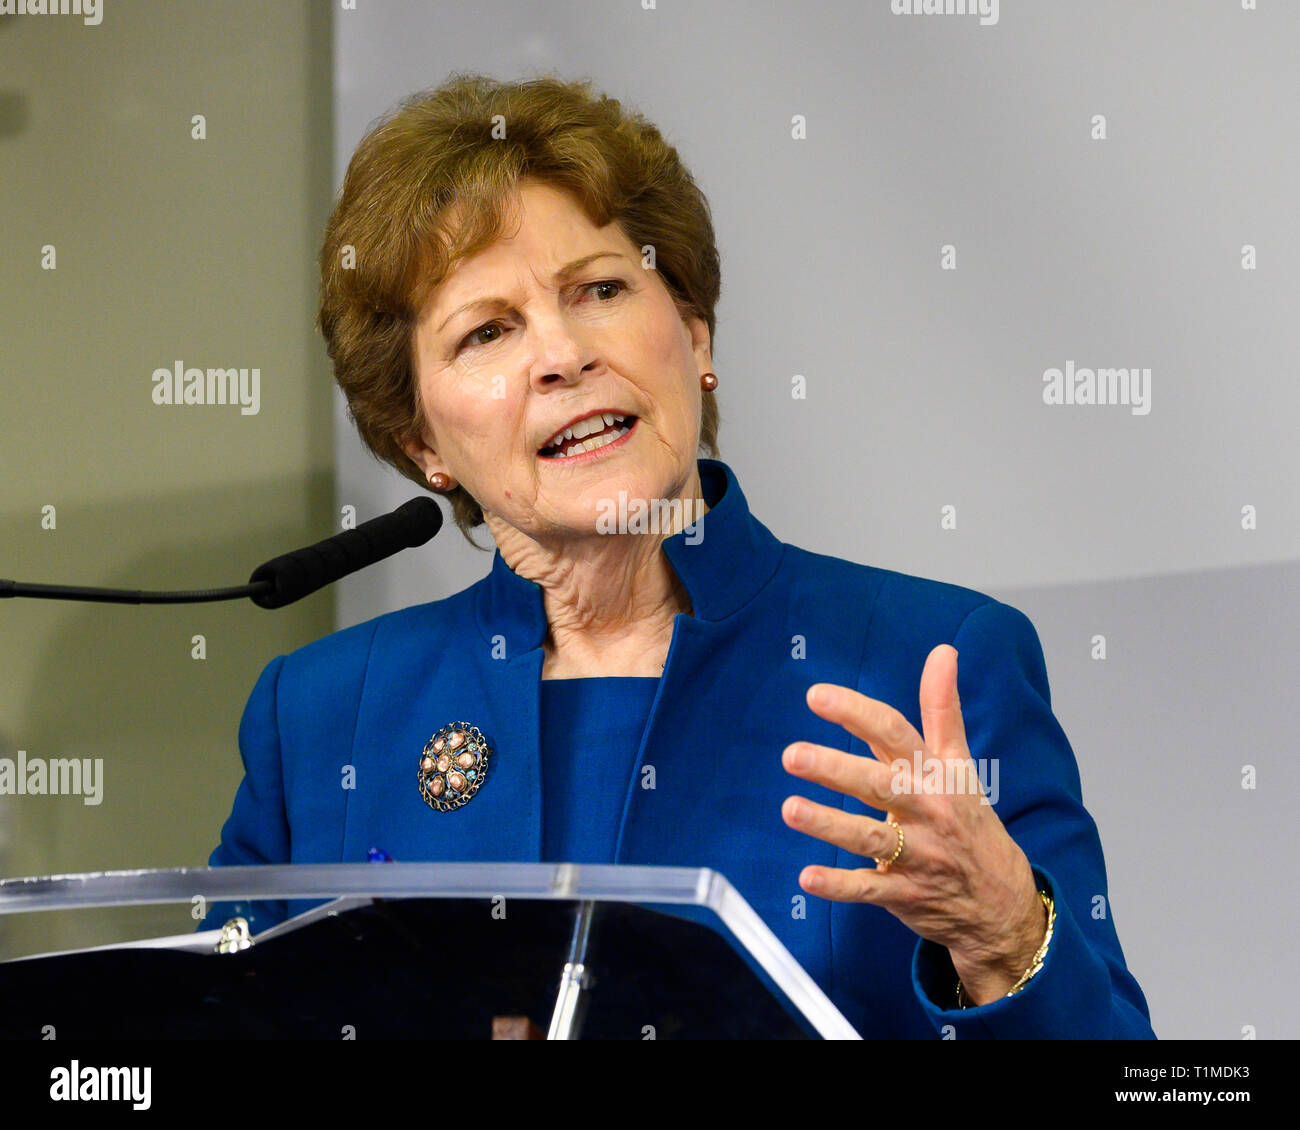 U.S. Senator Jeanne Shaheen (D-NH) seen speaking during a program titled 'Tracking Federal Funding to Combat the Opioid Crisis' at the Bipartisan Policy Center in Washington, DC. Stock Photo